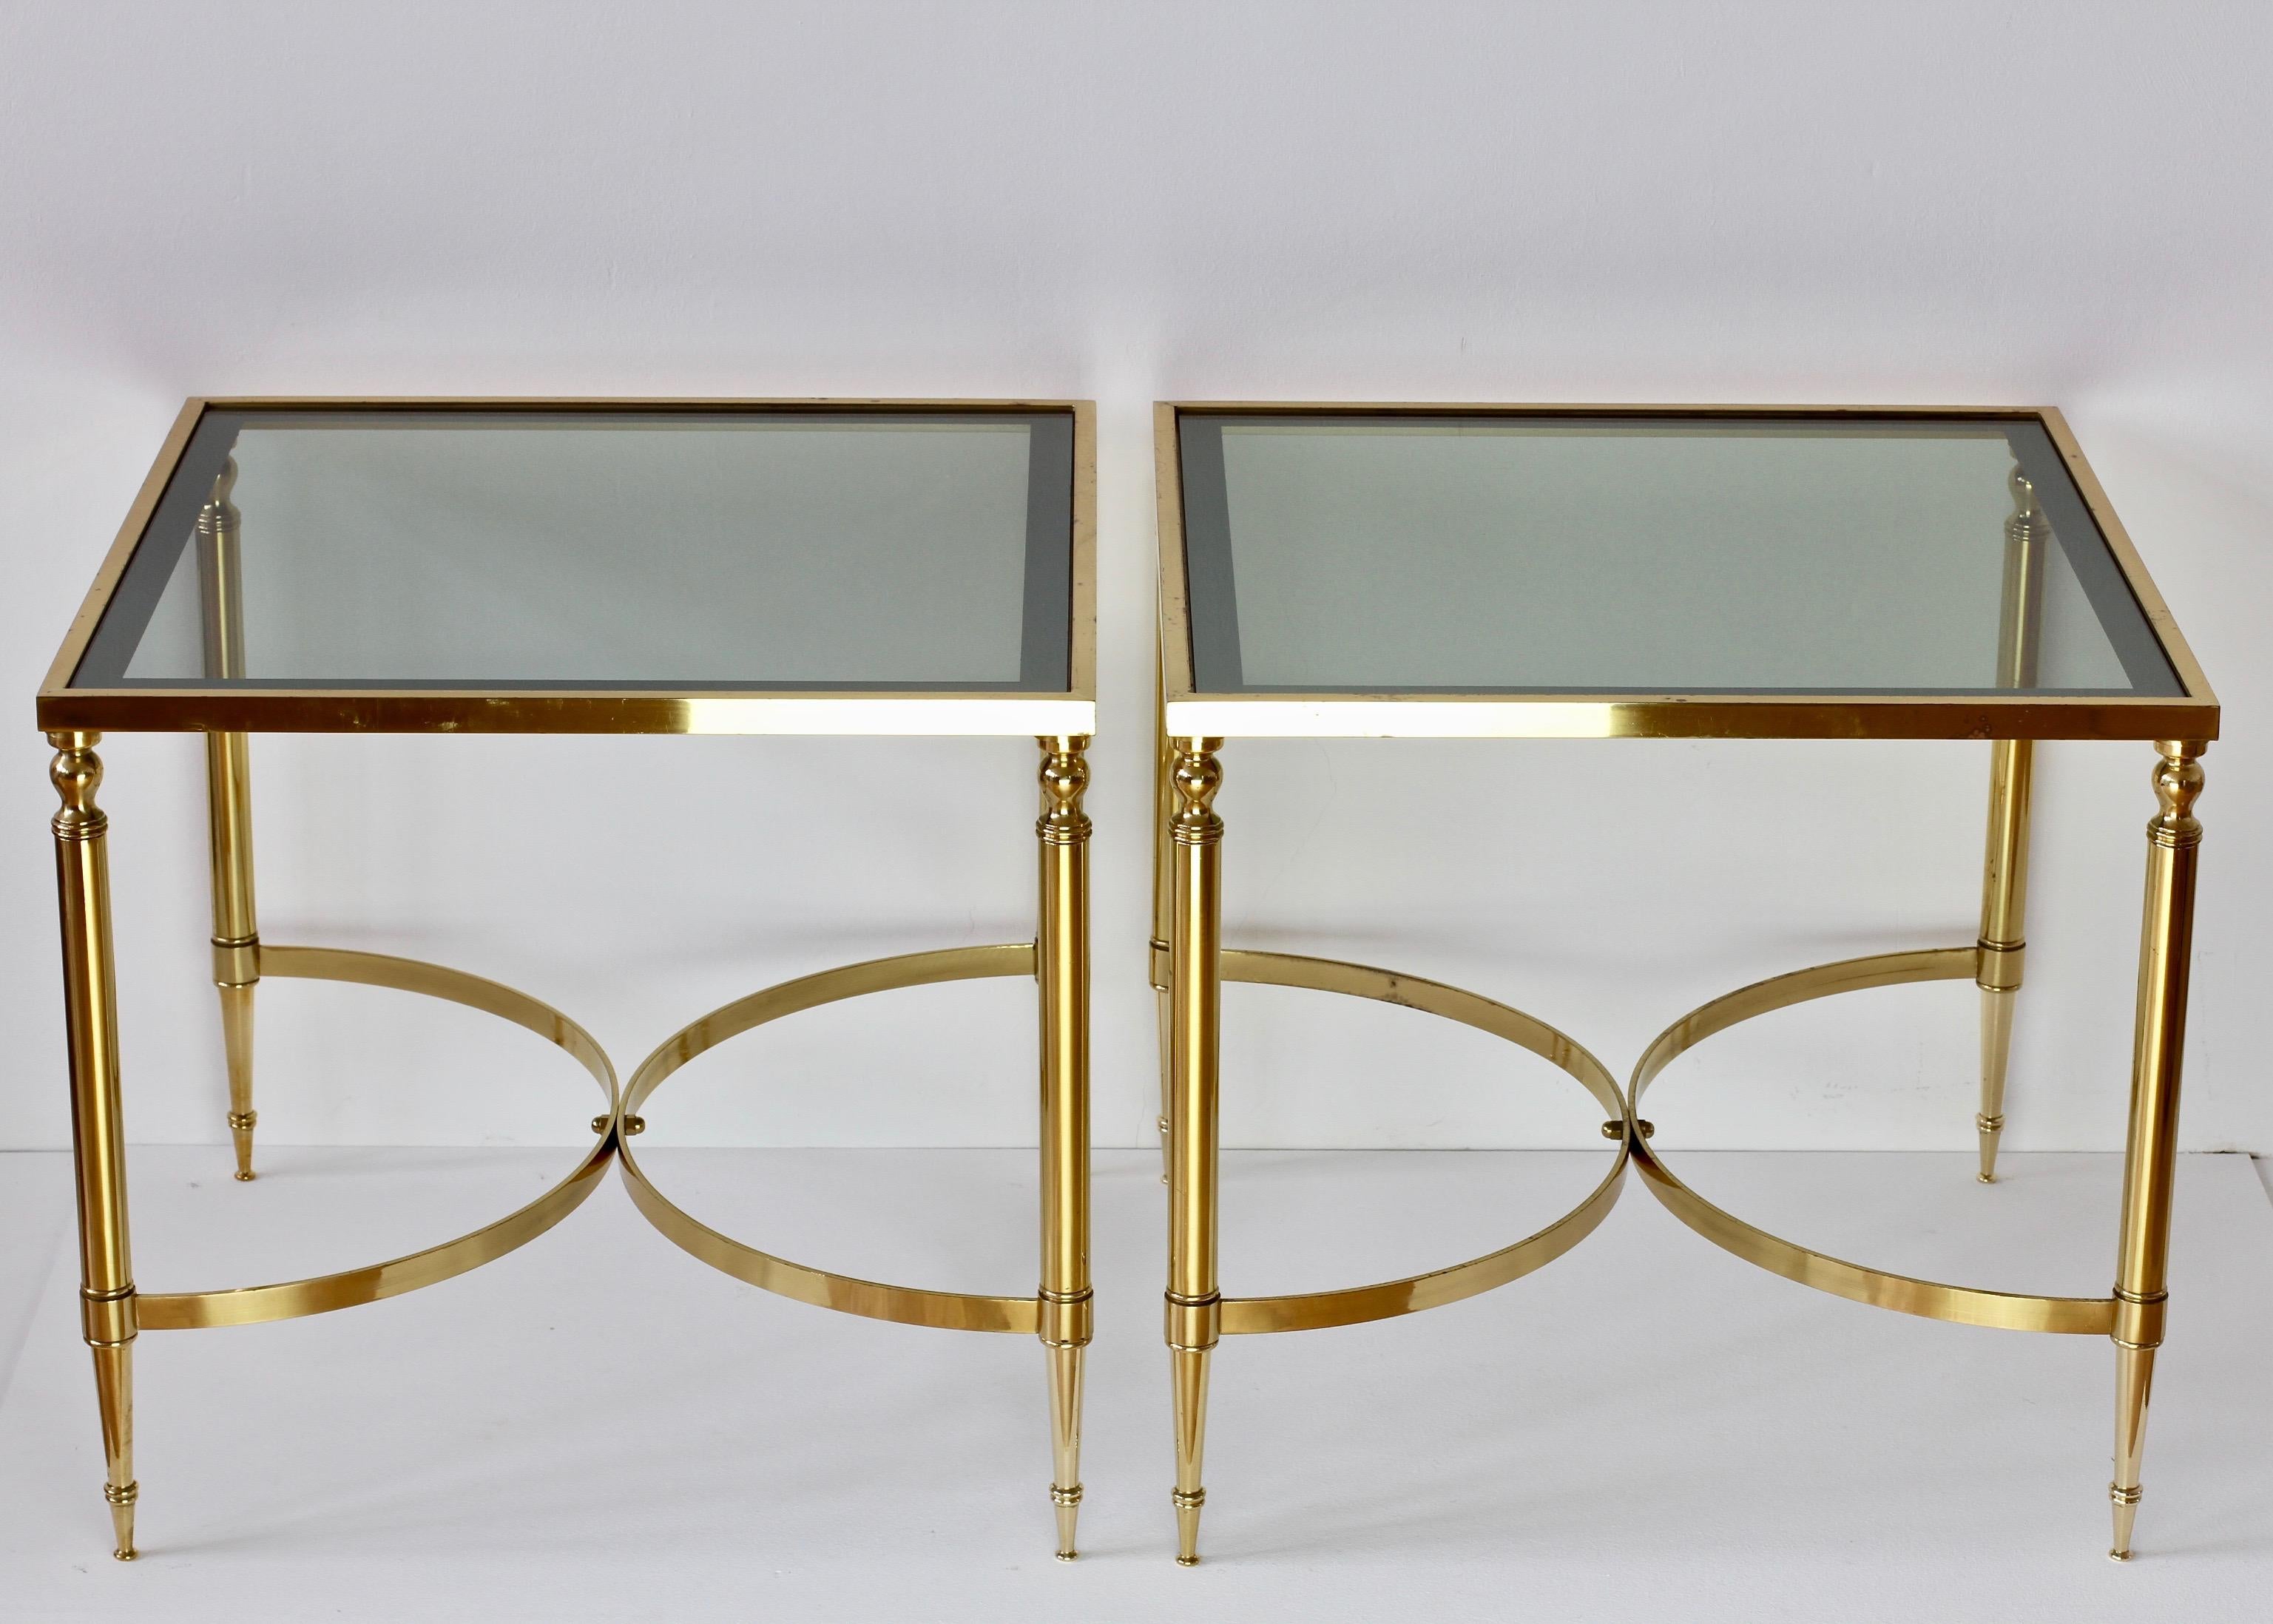 Polished Maison Jansen Style Pair of French Brass & Glass Side / End Tables / Nightstands